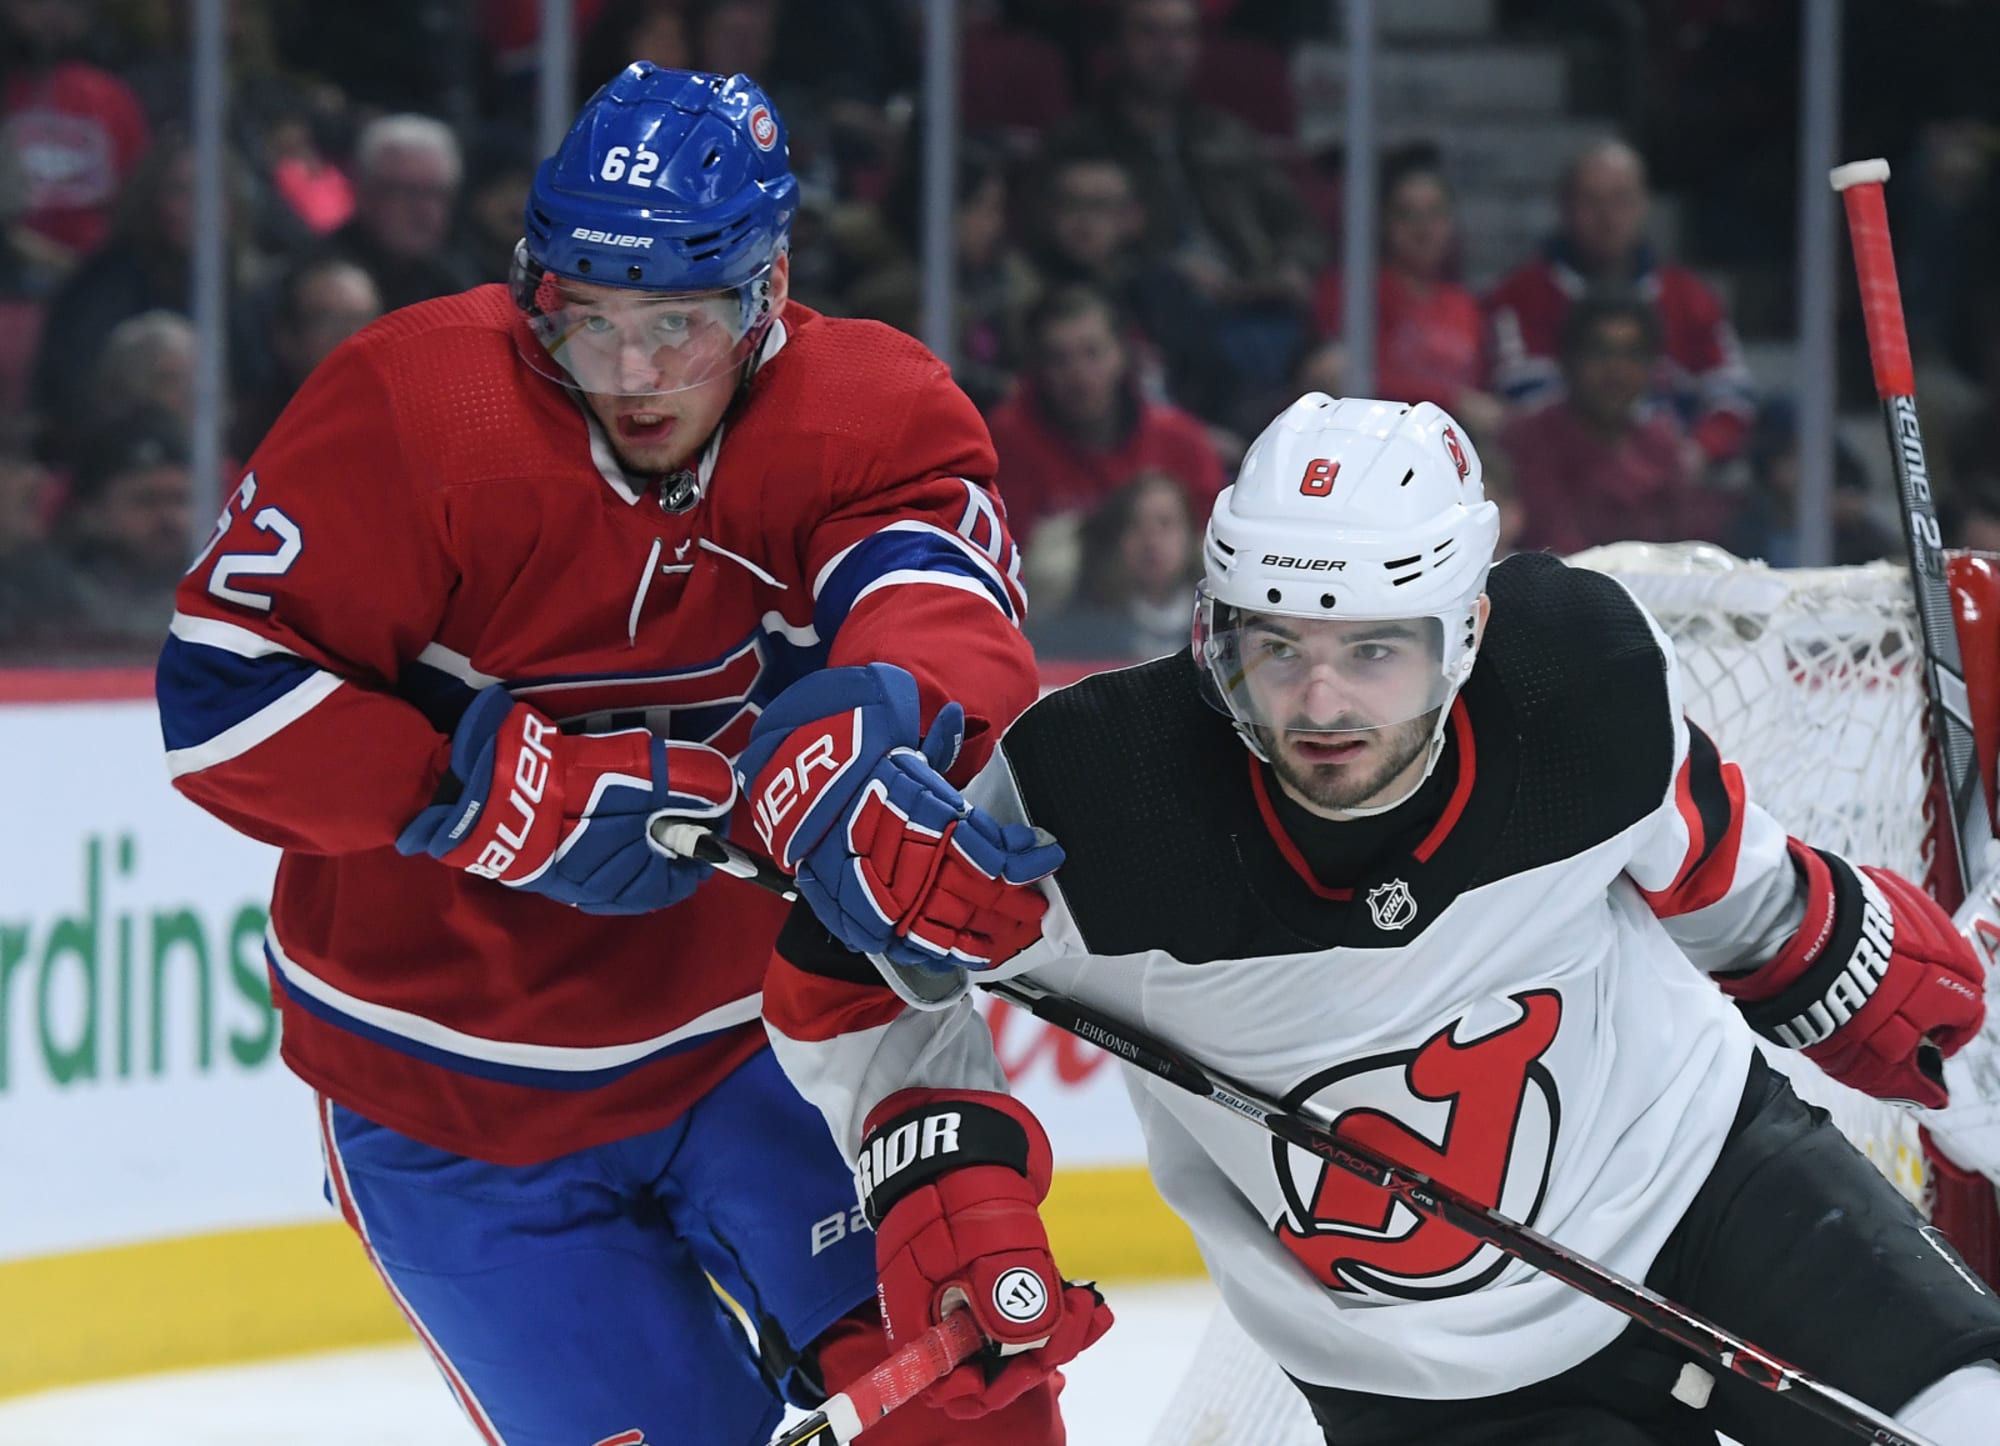 New Jersey Devils: 3 Trade Deadline Deals With Montreal Canadiens